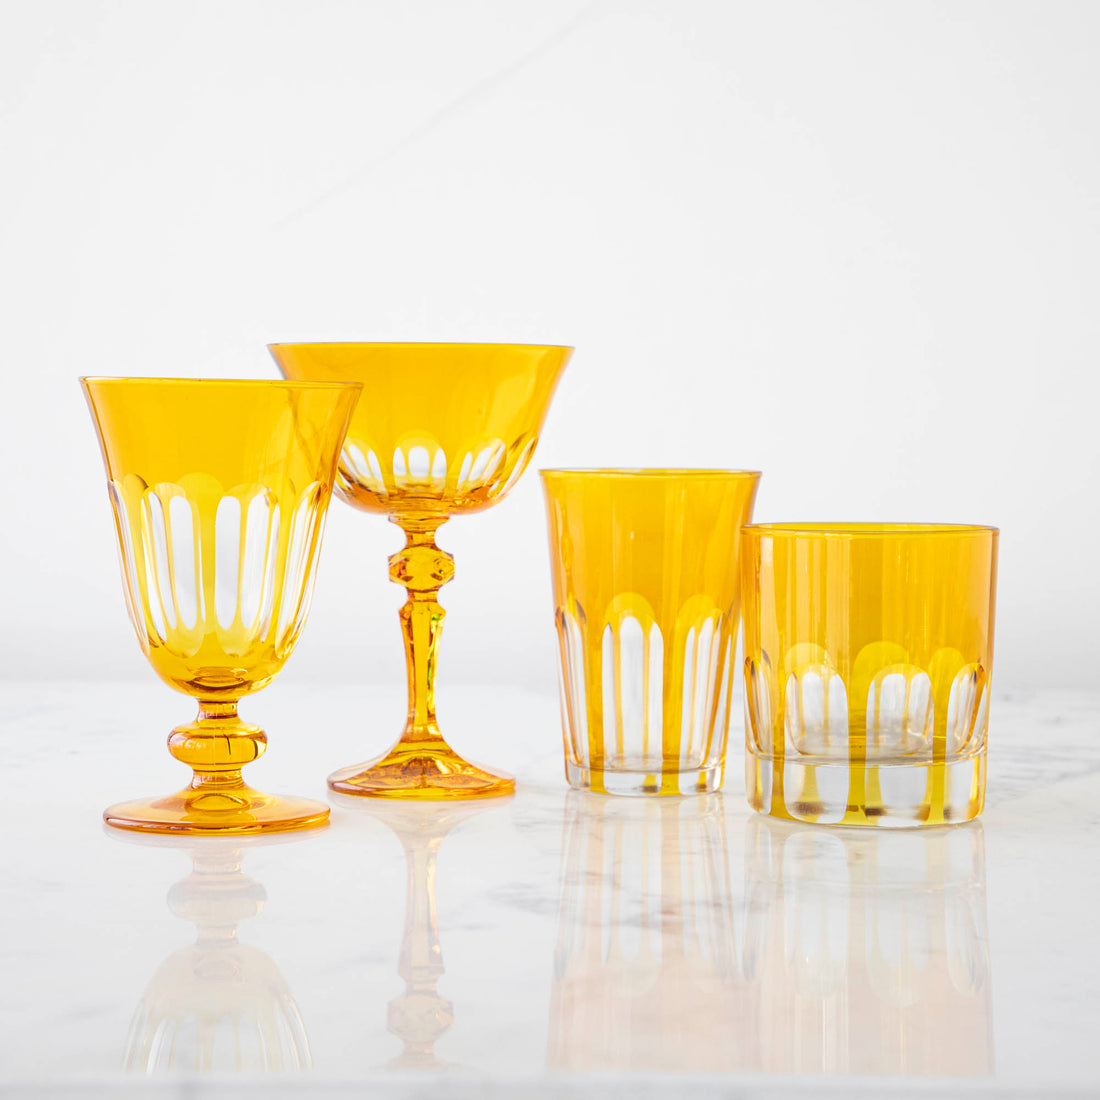 A set of Rialto Ginger (Dark Yellow) glasses from SIR/MADAM on a white surface, including two stemmed glasses and two tumblers with a vertical line pattern.